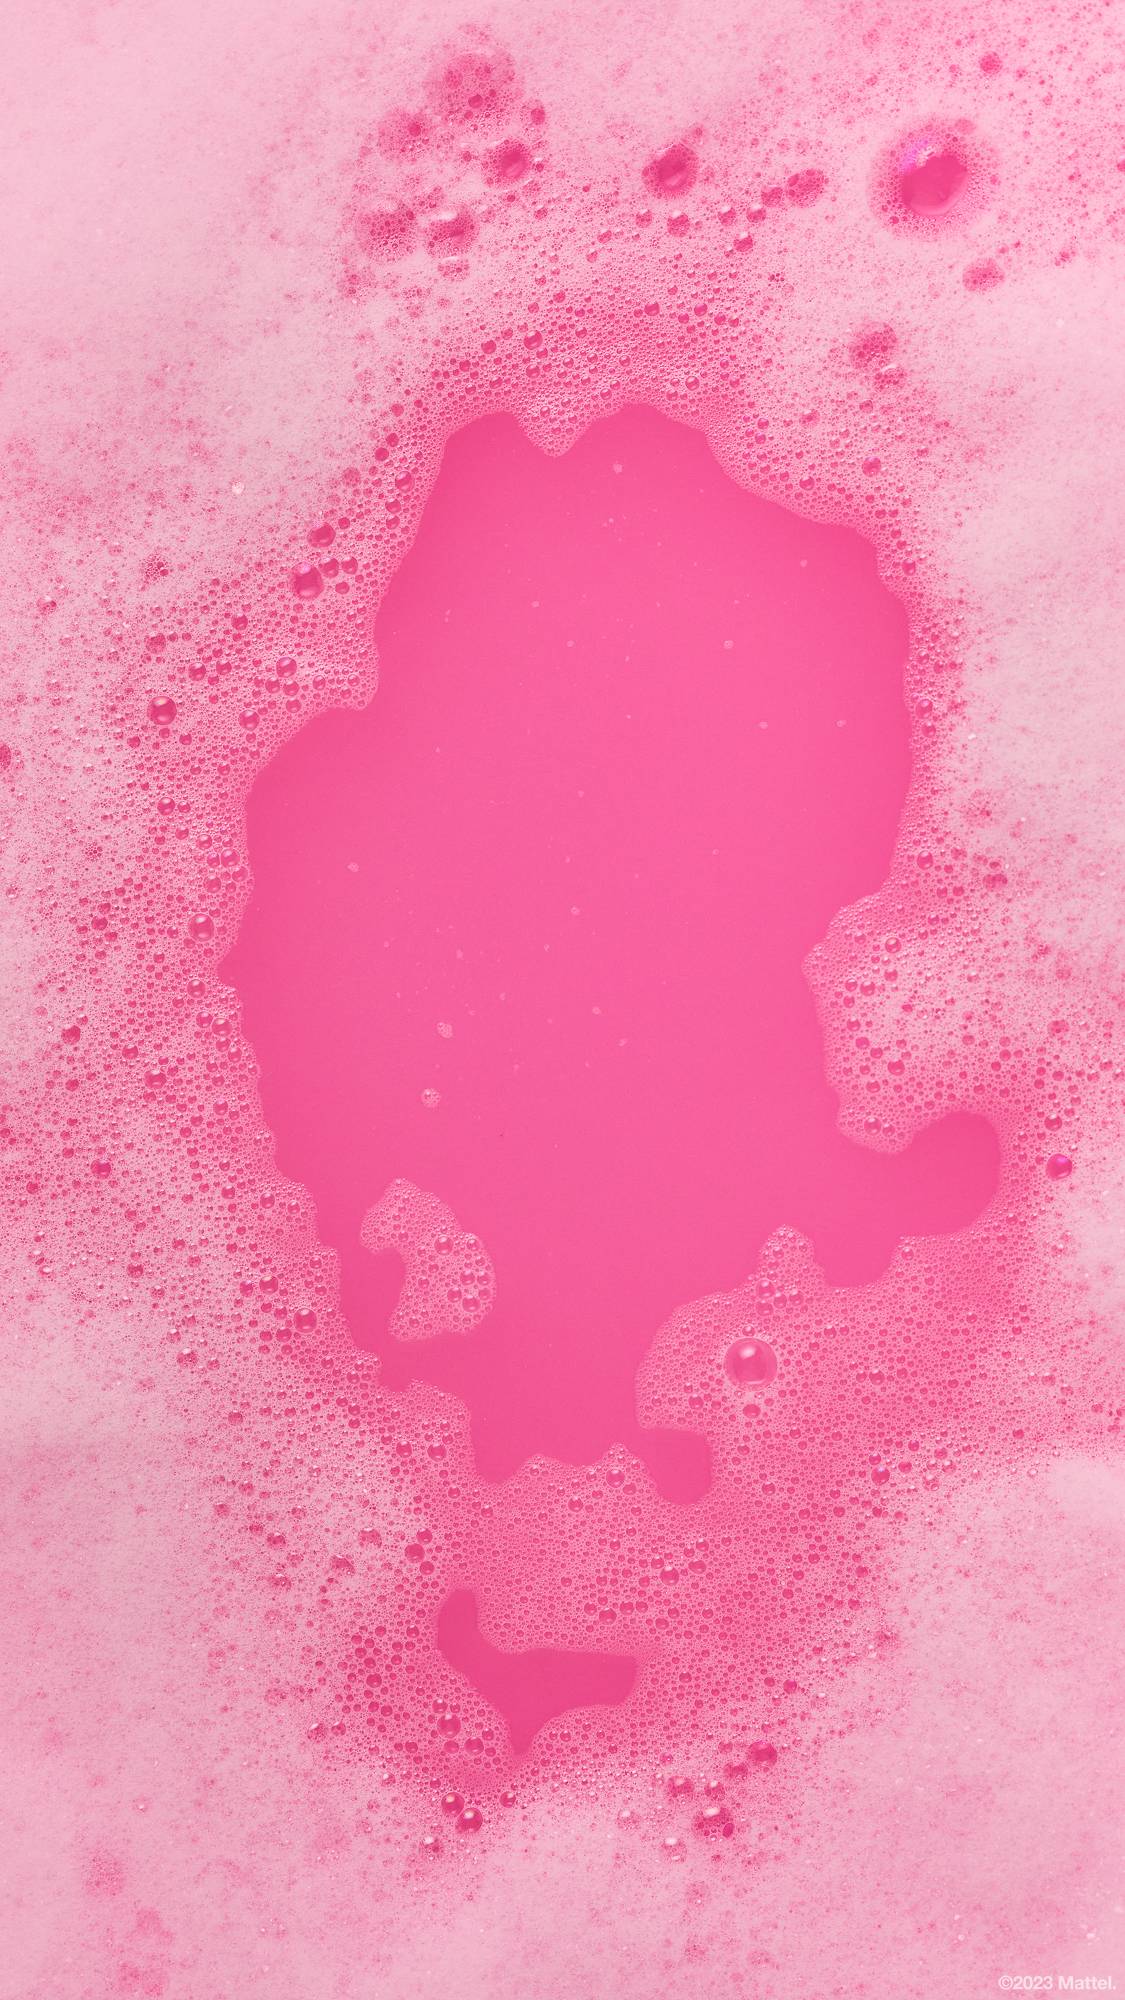 Image shows a close-up of deep, hot pink bath water framed by thick pink bubbles.